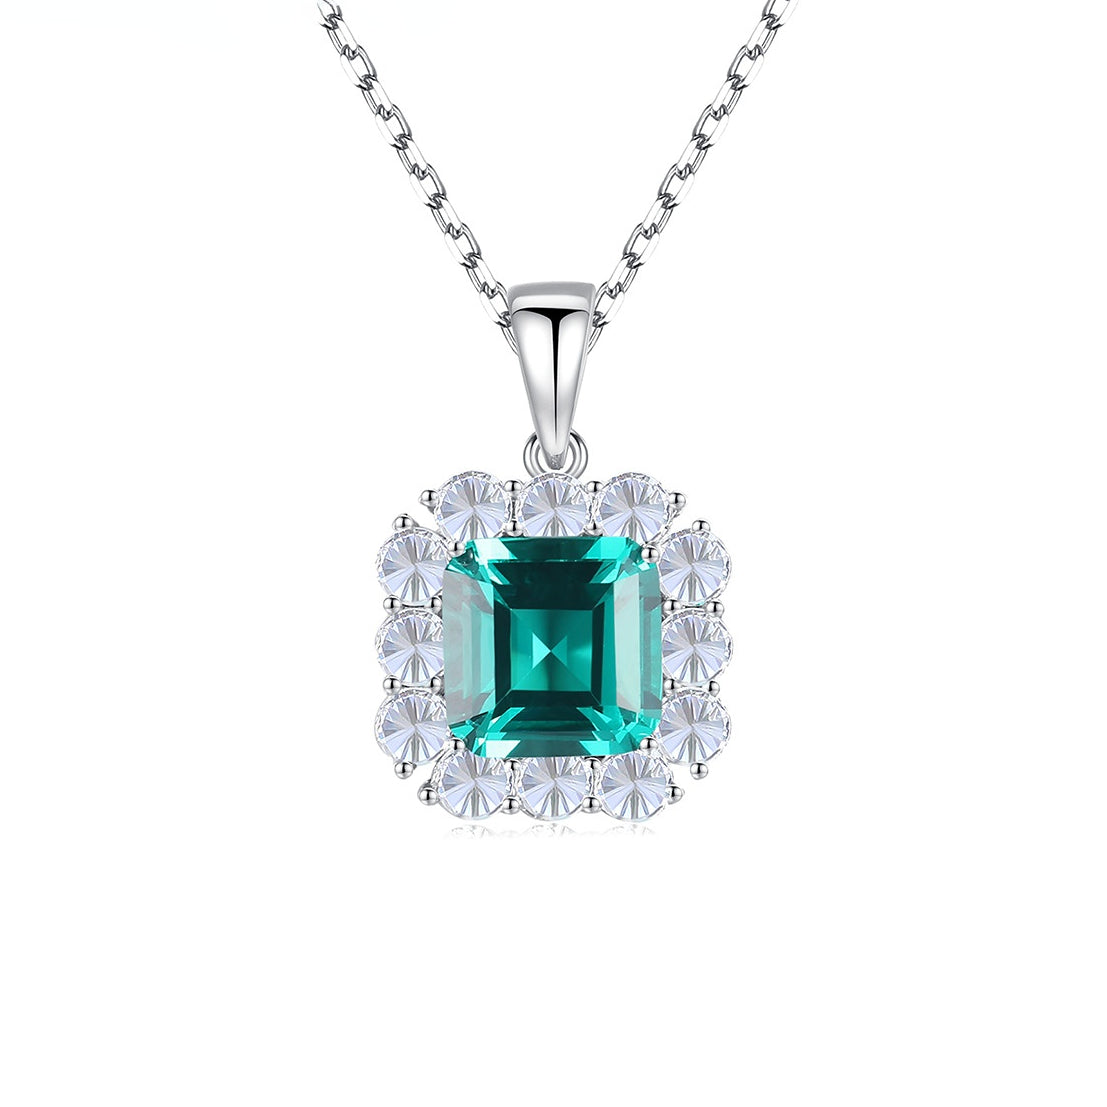 Gemstonely- Vintage Style S925 Silver Necklace with Synthetic Emerald and Square Diamond Pendant for Women in Elegant and Sophisticated Design